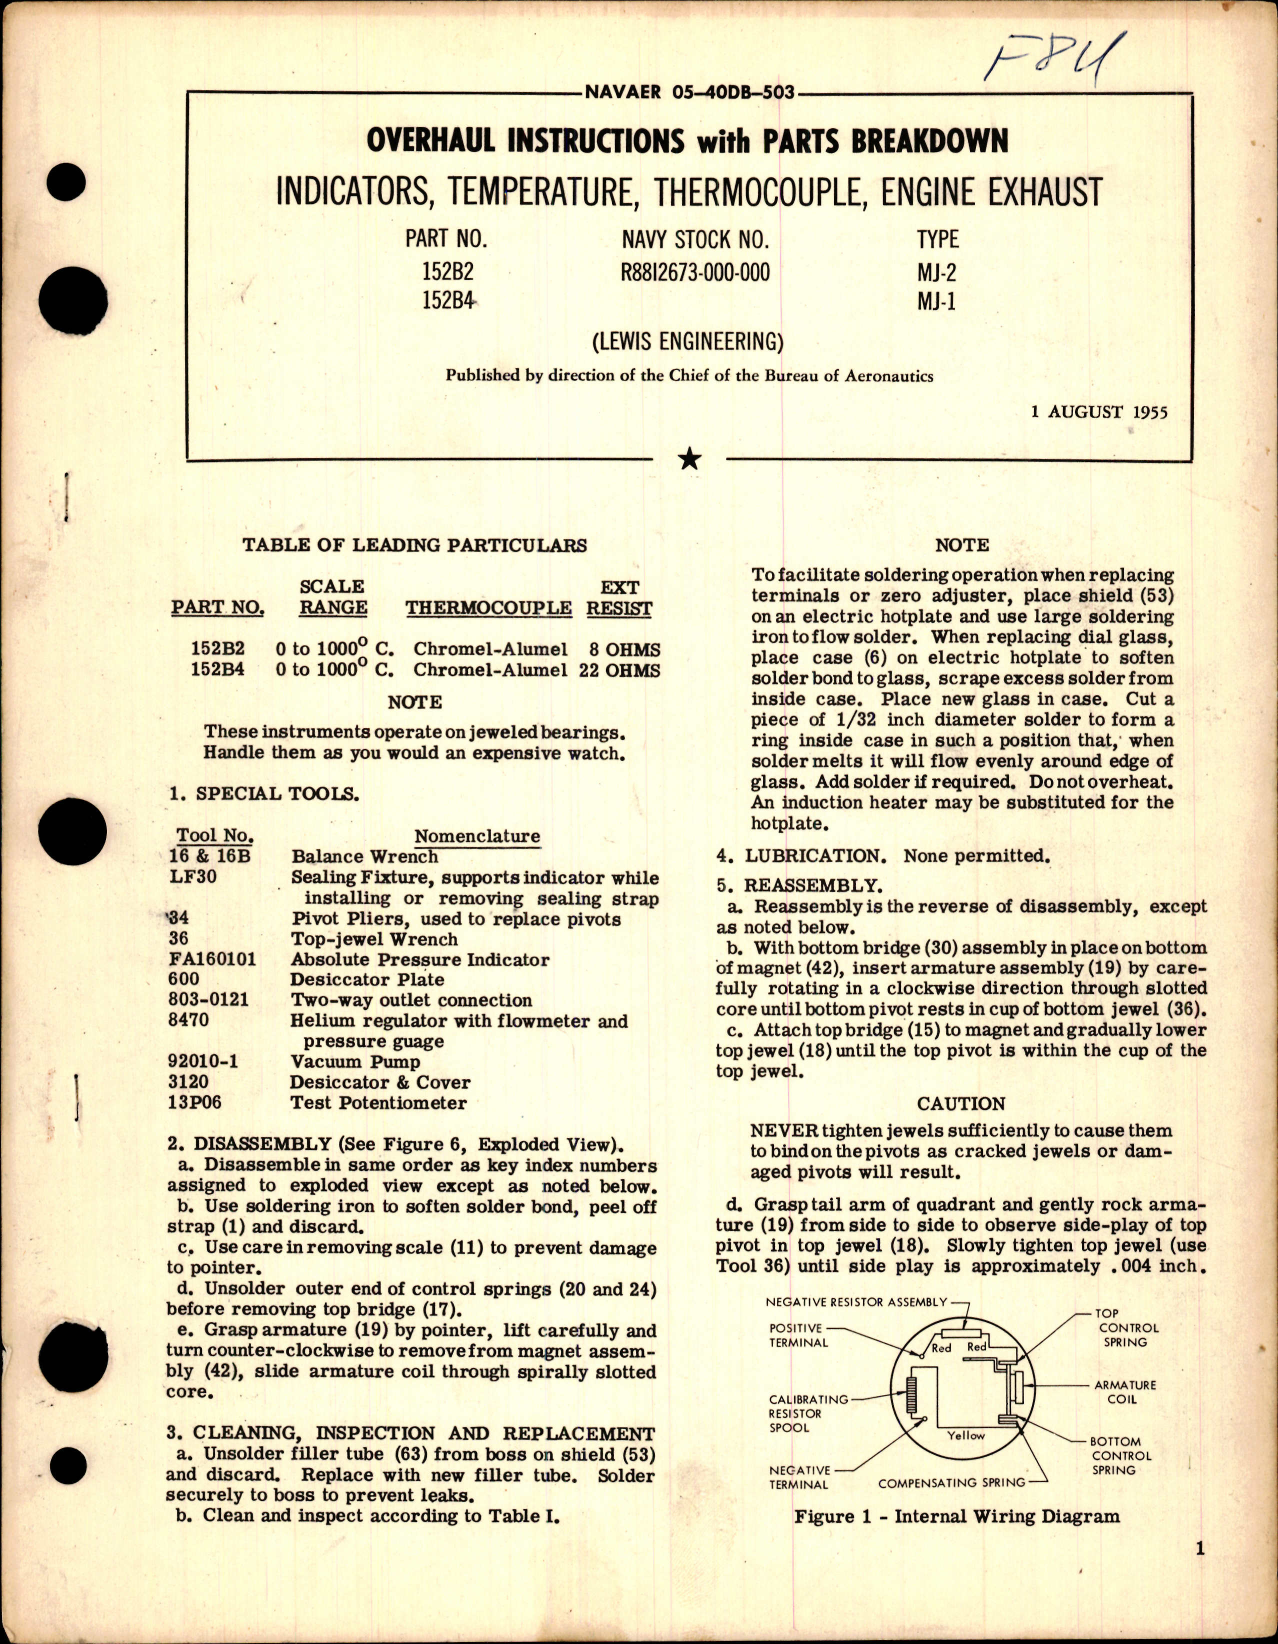 Sample page 1 from AirCorps Library document: Overhaul Instructions with Parts Breakdown for Indicators, Temperature, Thermocouple and Engine Exhaust